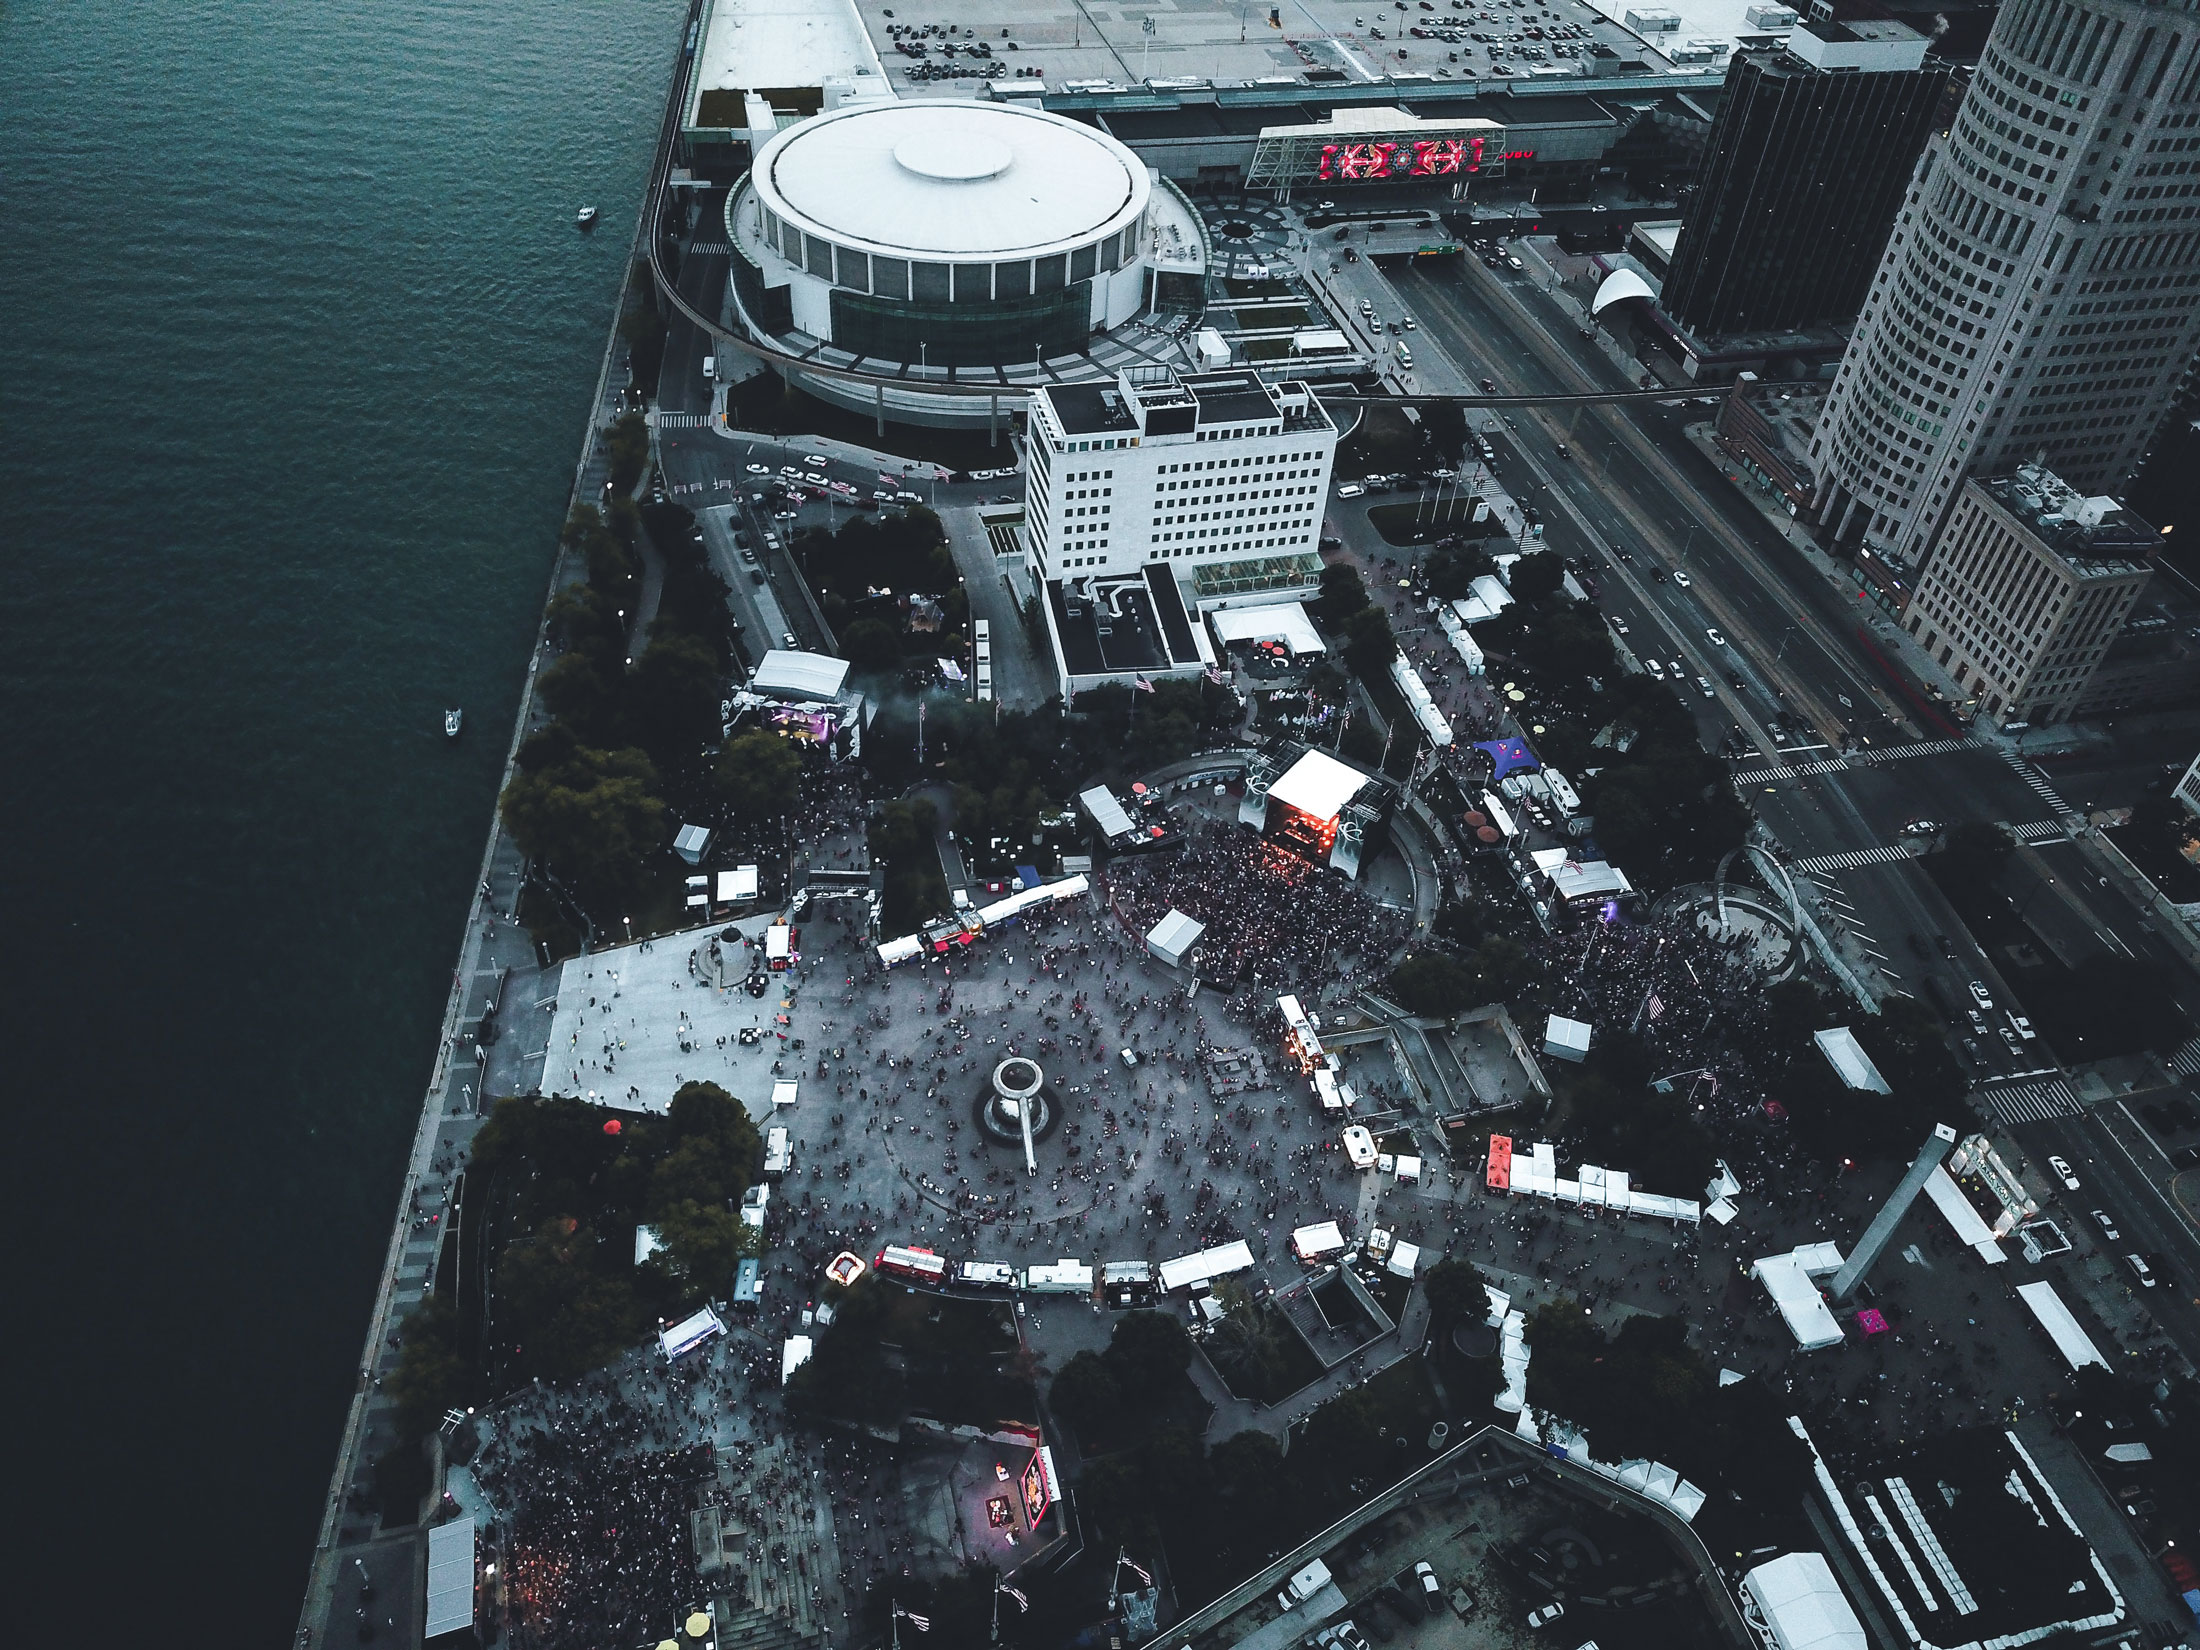 Aerial photo of Hart Plaza. Shows a crowd of people in front of the stage. Also shows the sea to the left, roads to the right, then tall skyscrapers on the right.